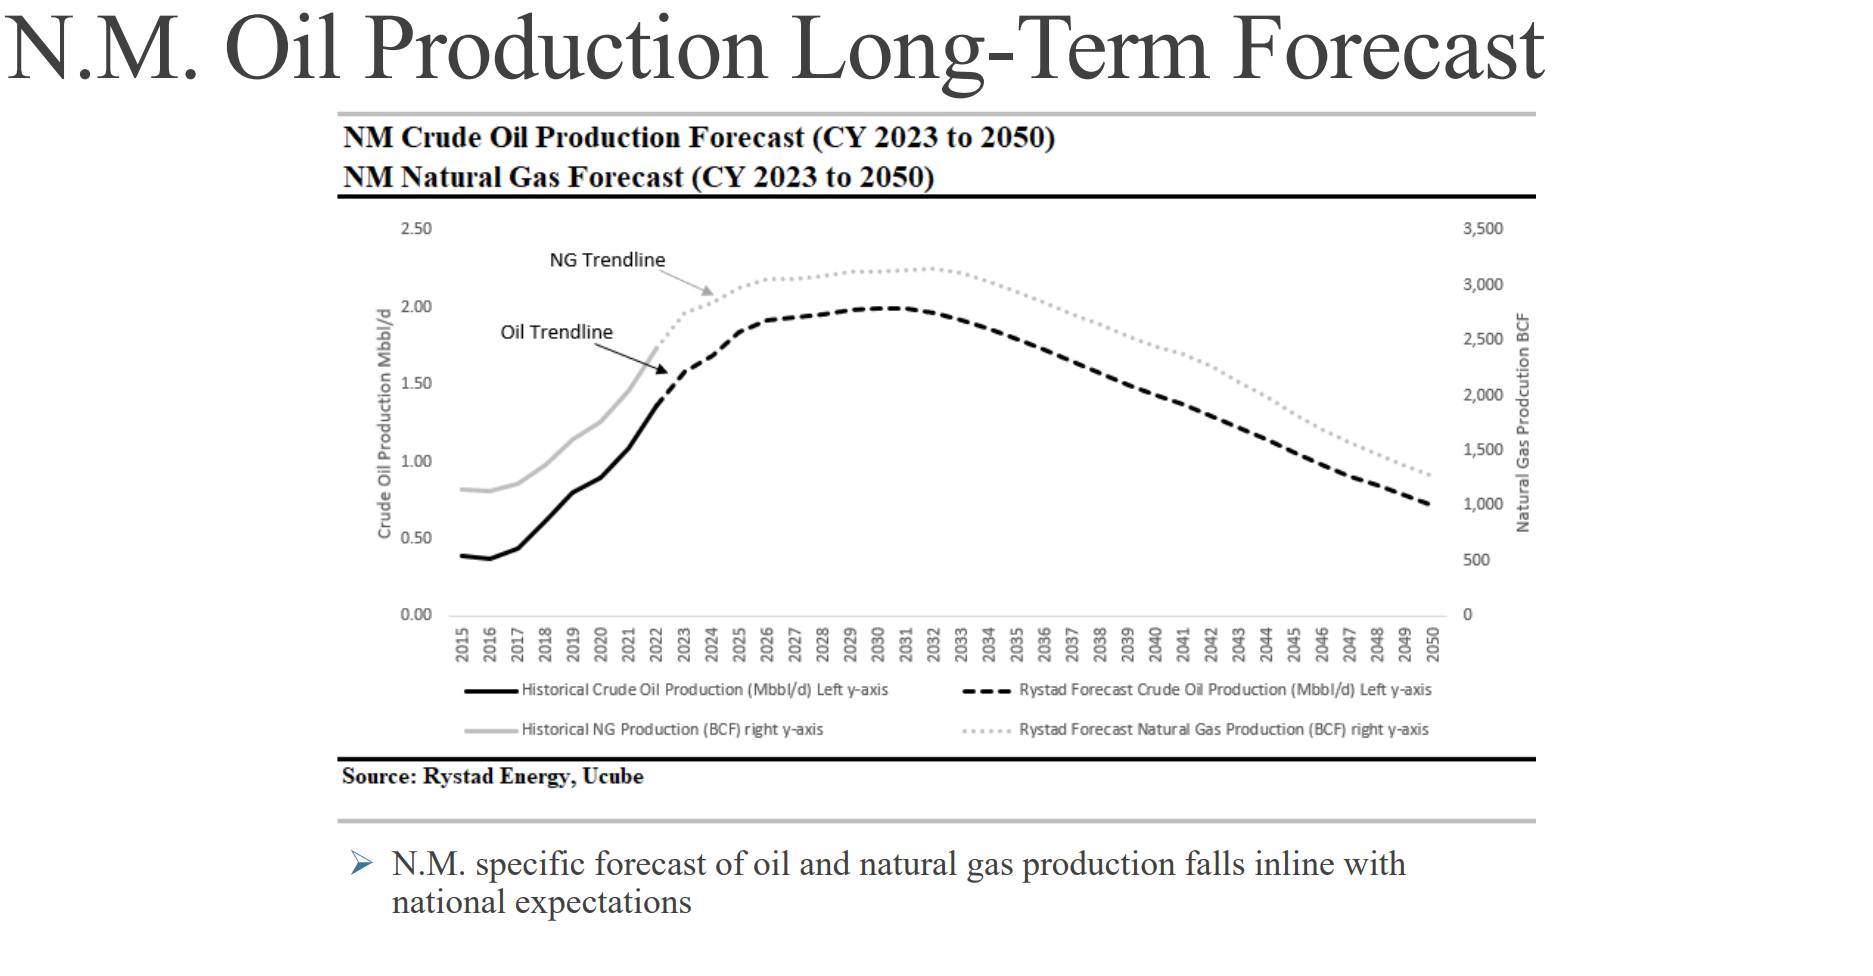 Long-term economic outlook envisions oil and gas funding dropping 